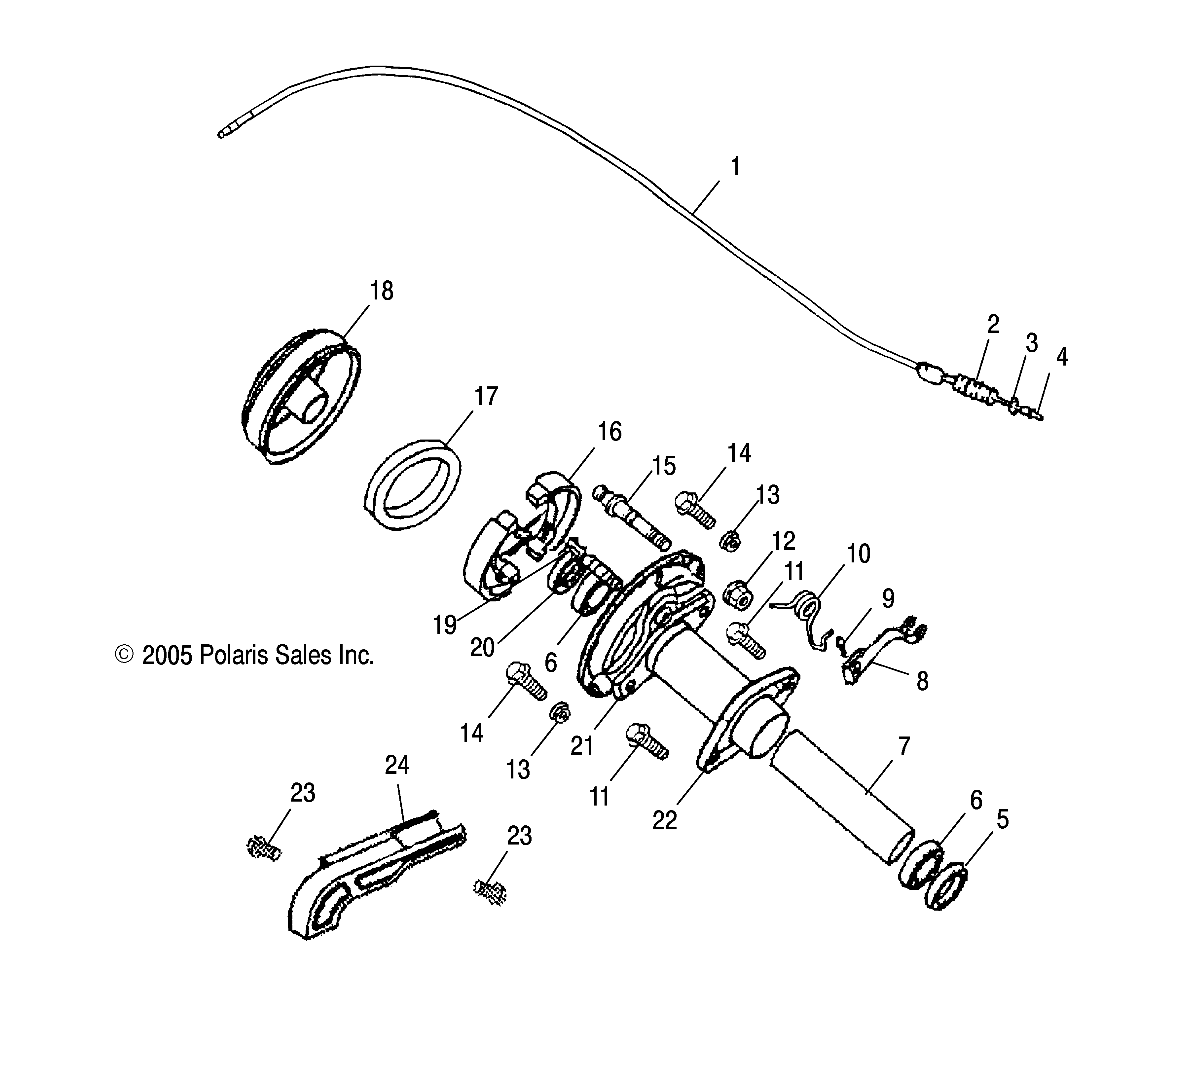 Part Number : 0452056 ASM-AXLE FIXED HOUSING